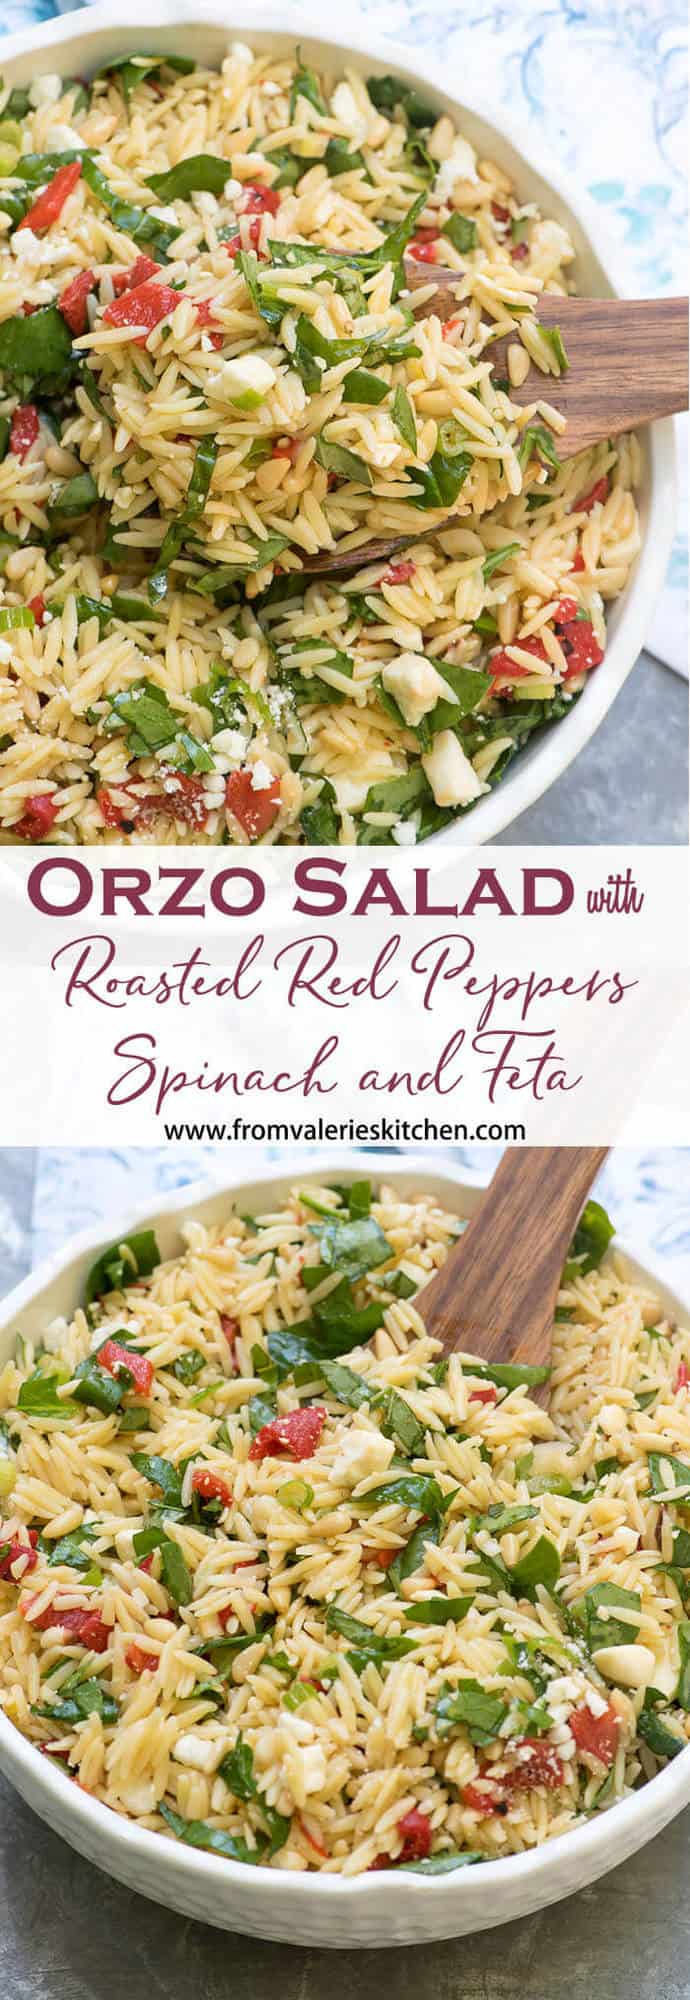 A two image vertical collage of Orzo Salad with Roasted Red Peppers, Spinach and Feta with overlay text.